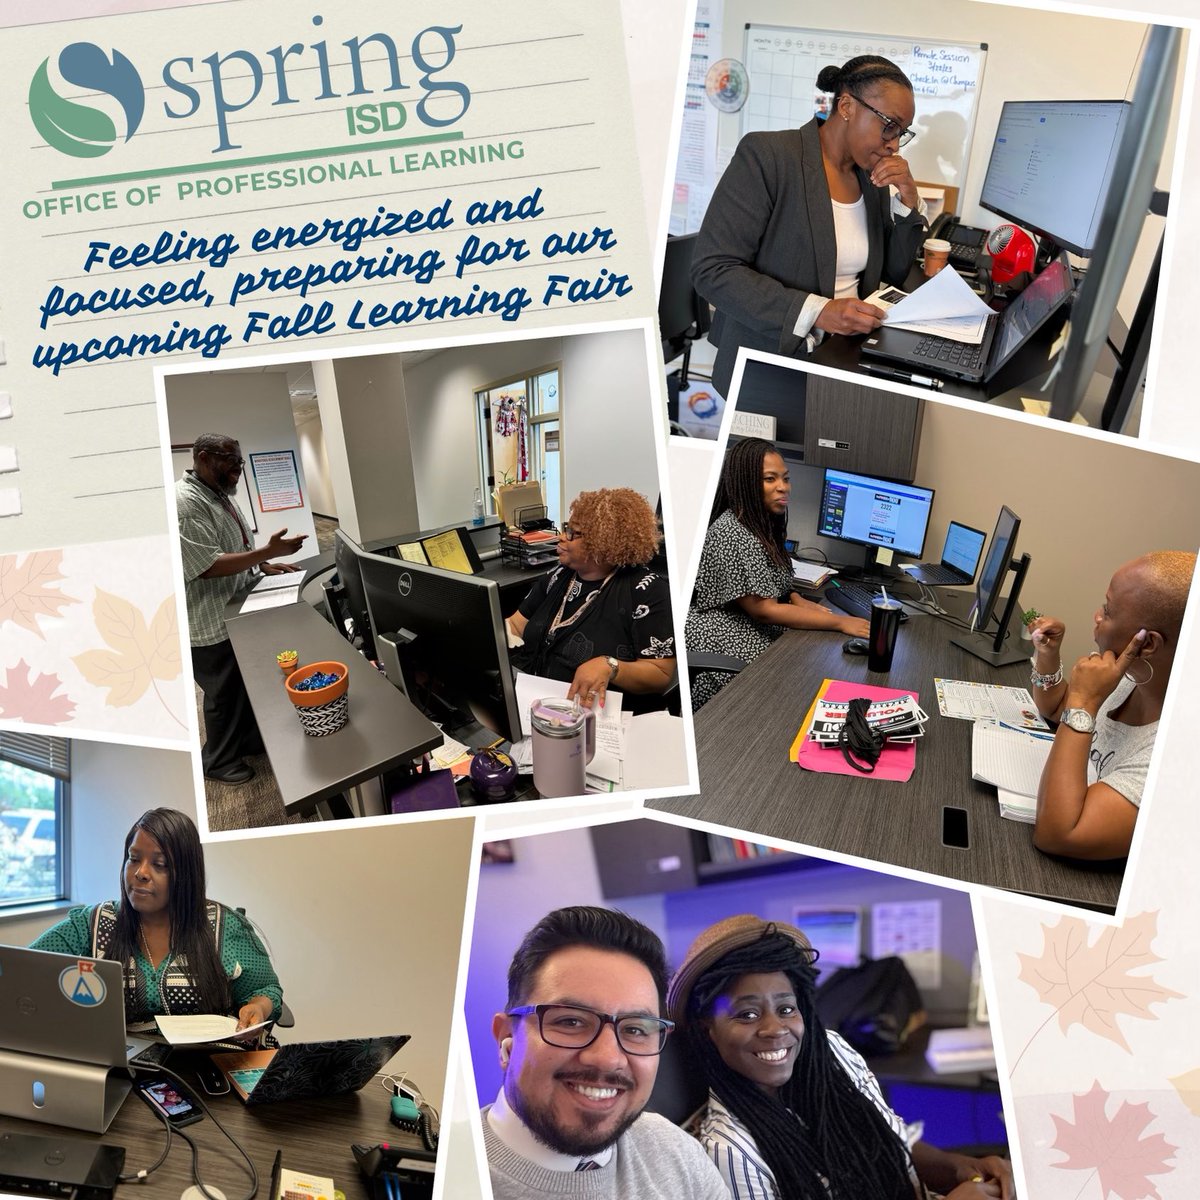 When Teamwork & Synergy meet, incredible things happen! Did you know that teams with High Synergy are 50% more likely to innovate successfully?💡We are harnessing to power of Collaboration! #results #team #wearespring